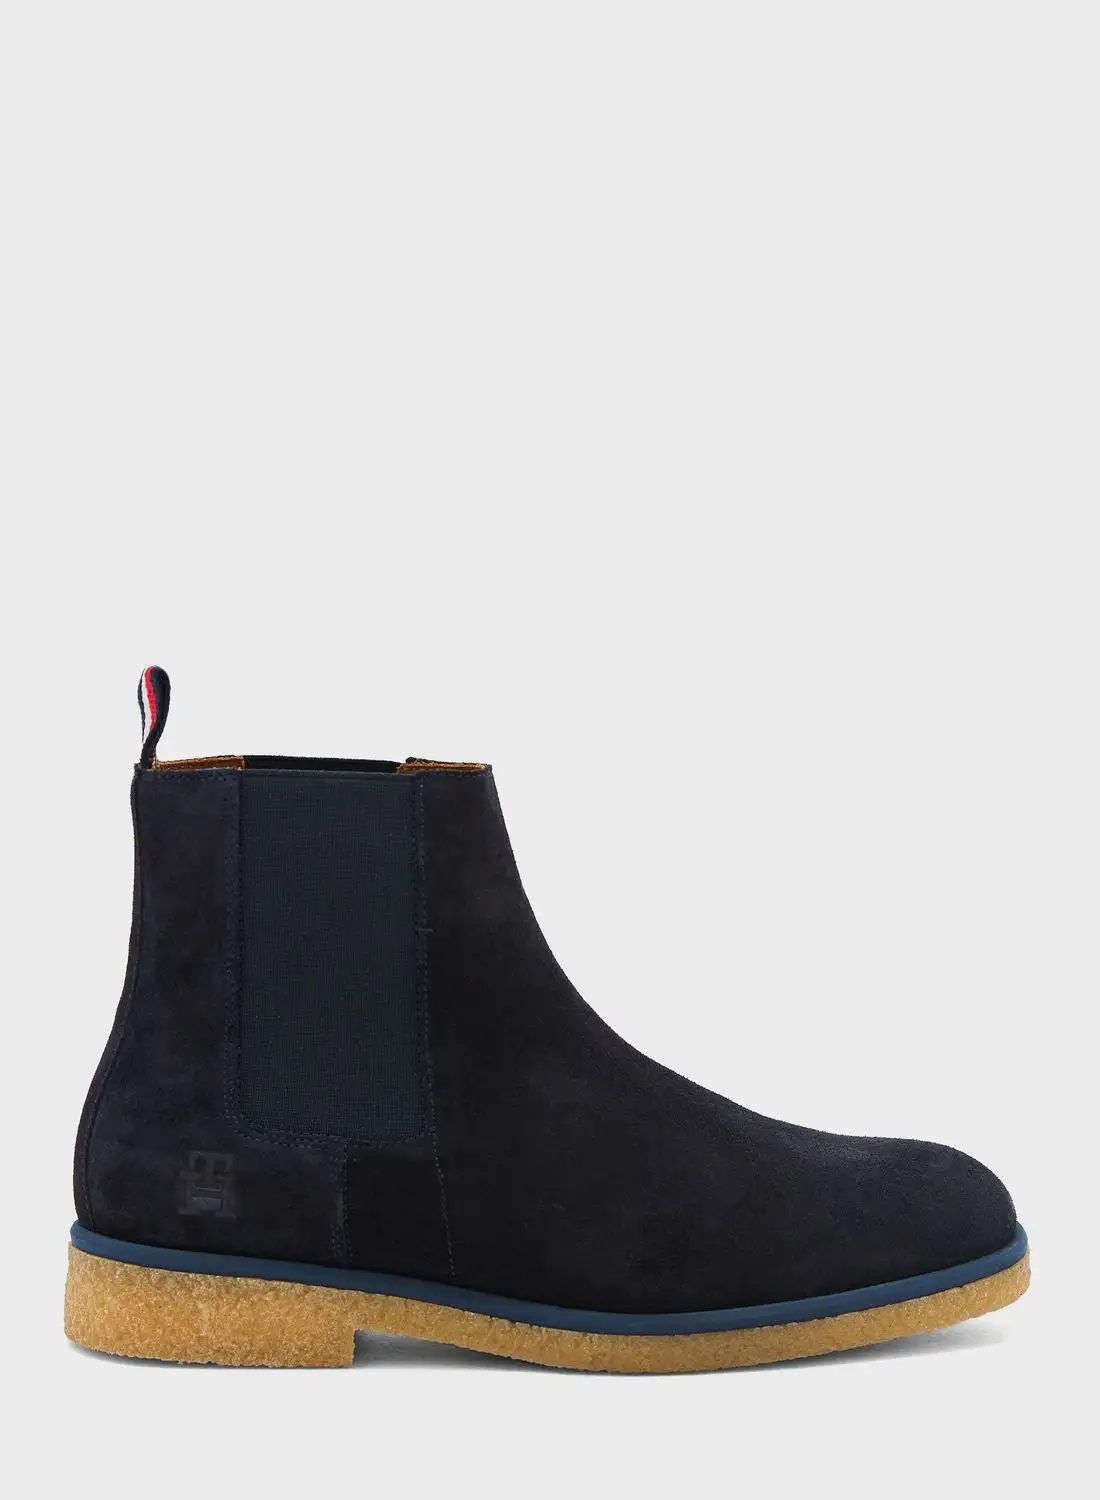 TOMMY HILFIGER Casual Chalsea Boots